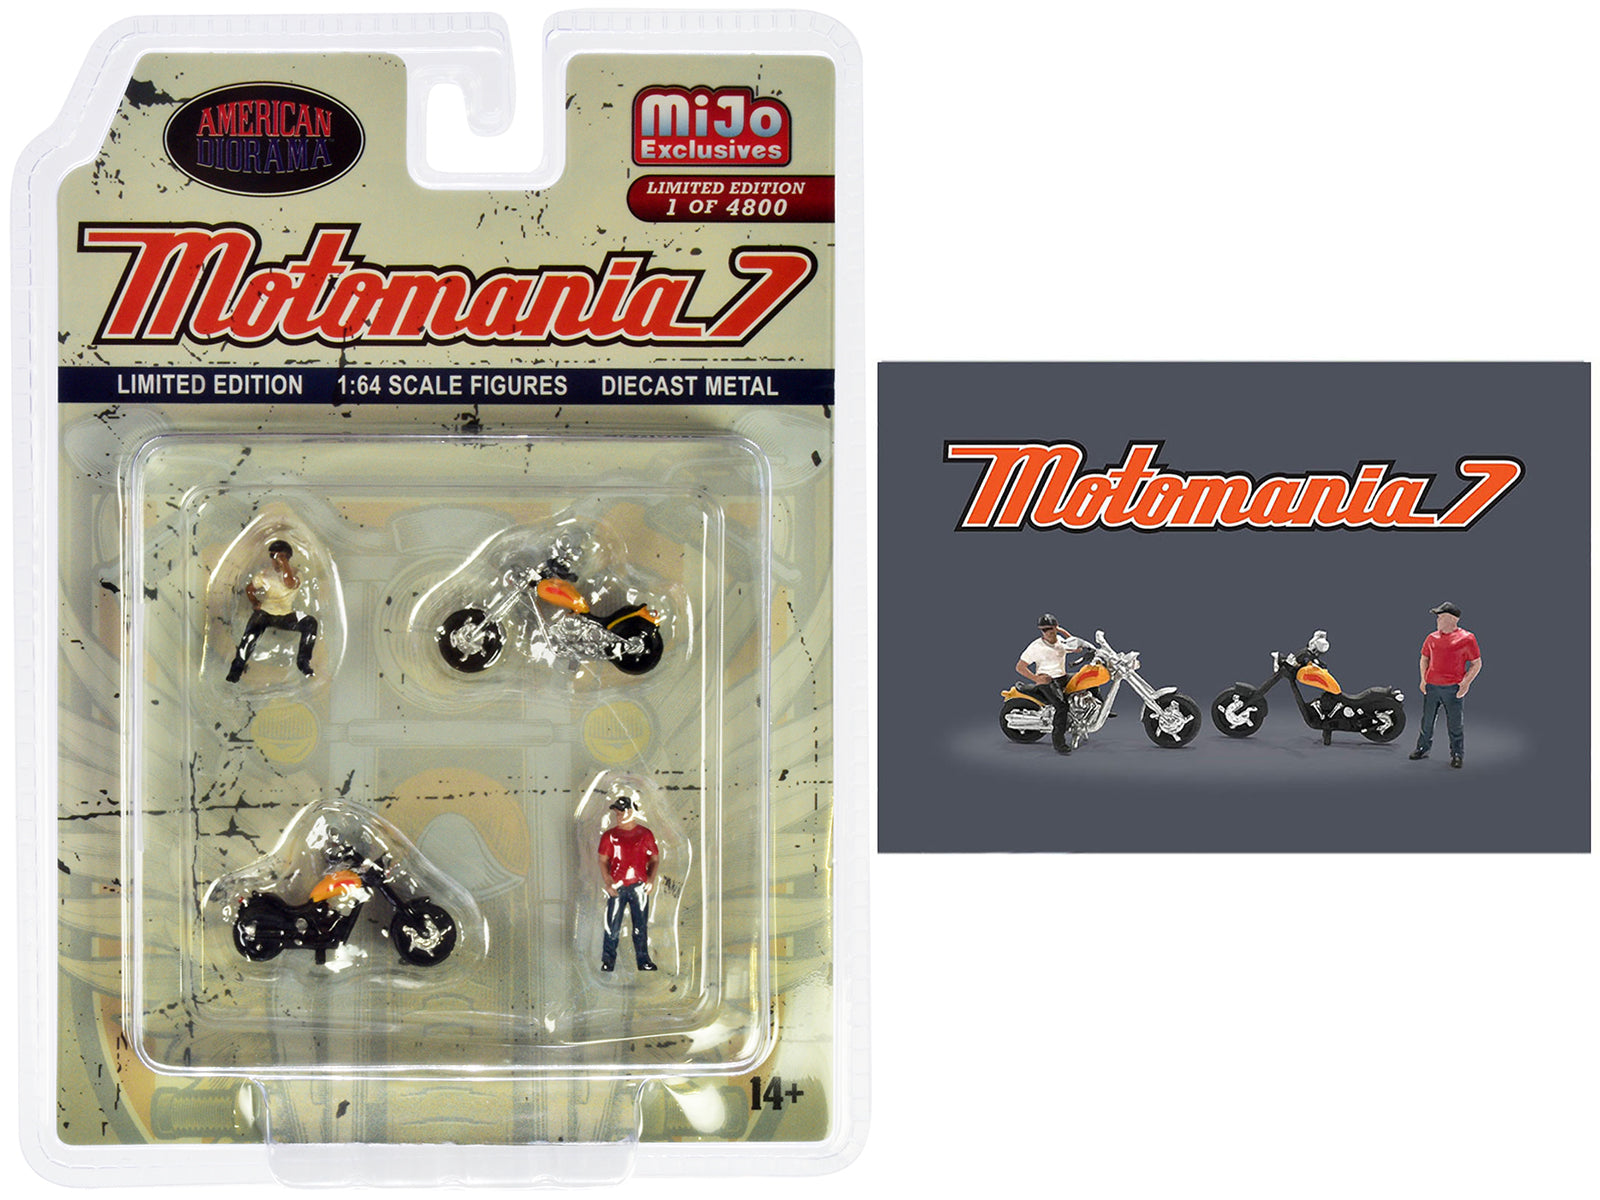 "Motomania 7" 4 piece Diecast Figure Set (2 Figures 2 Motorcycles) Limited Edition to 4800 pieces Worldwide for 1/64 scale models by American Diorama